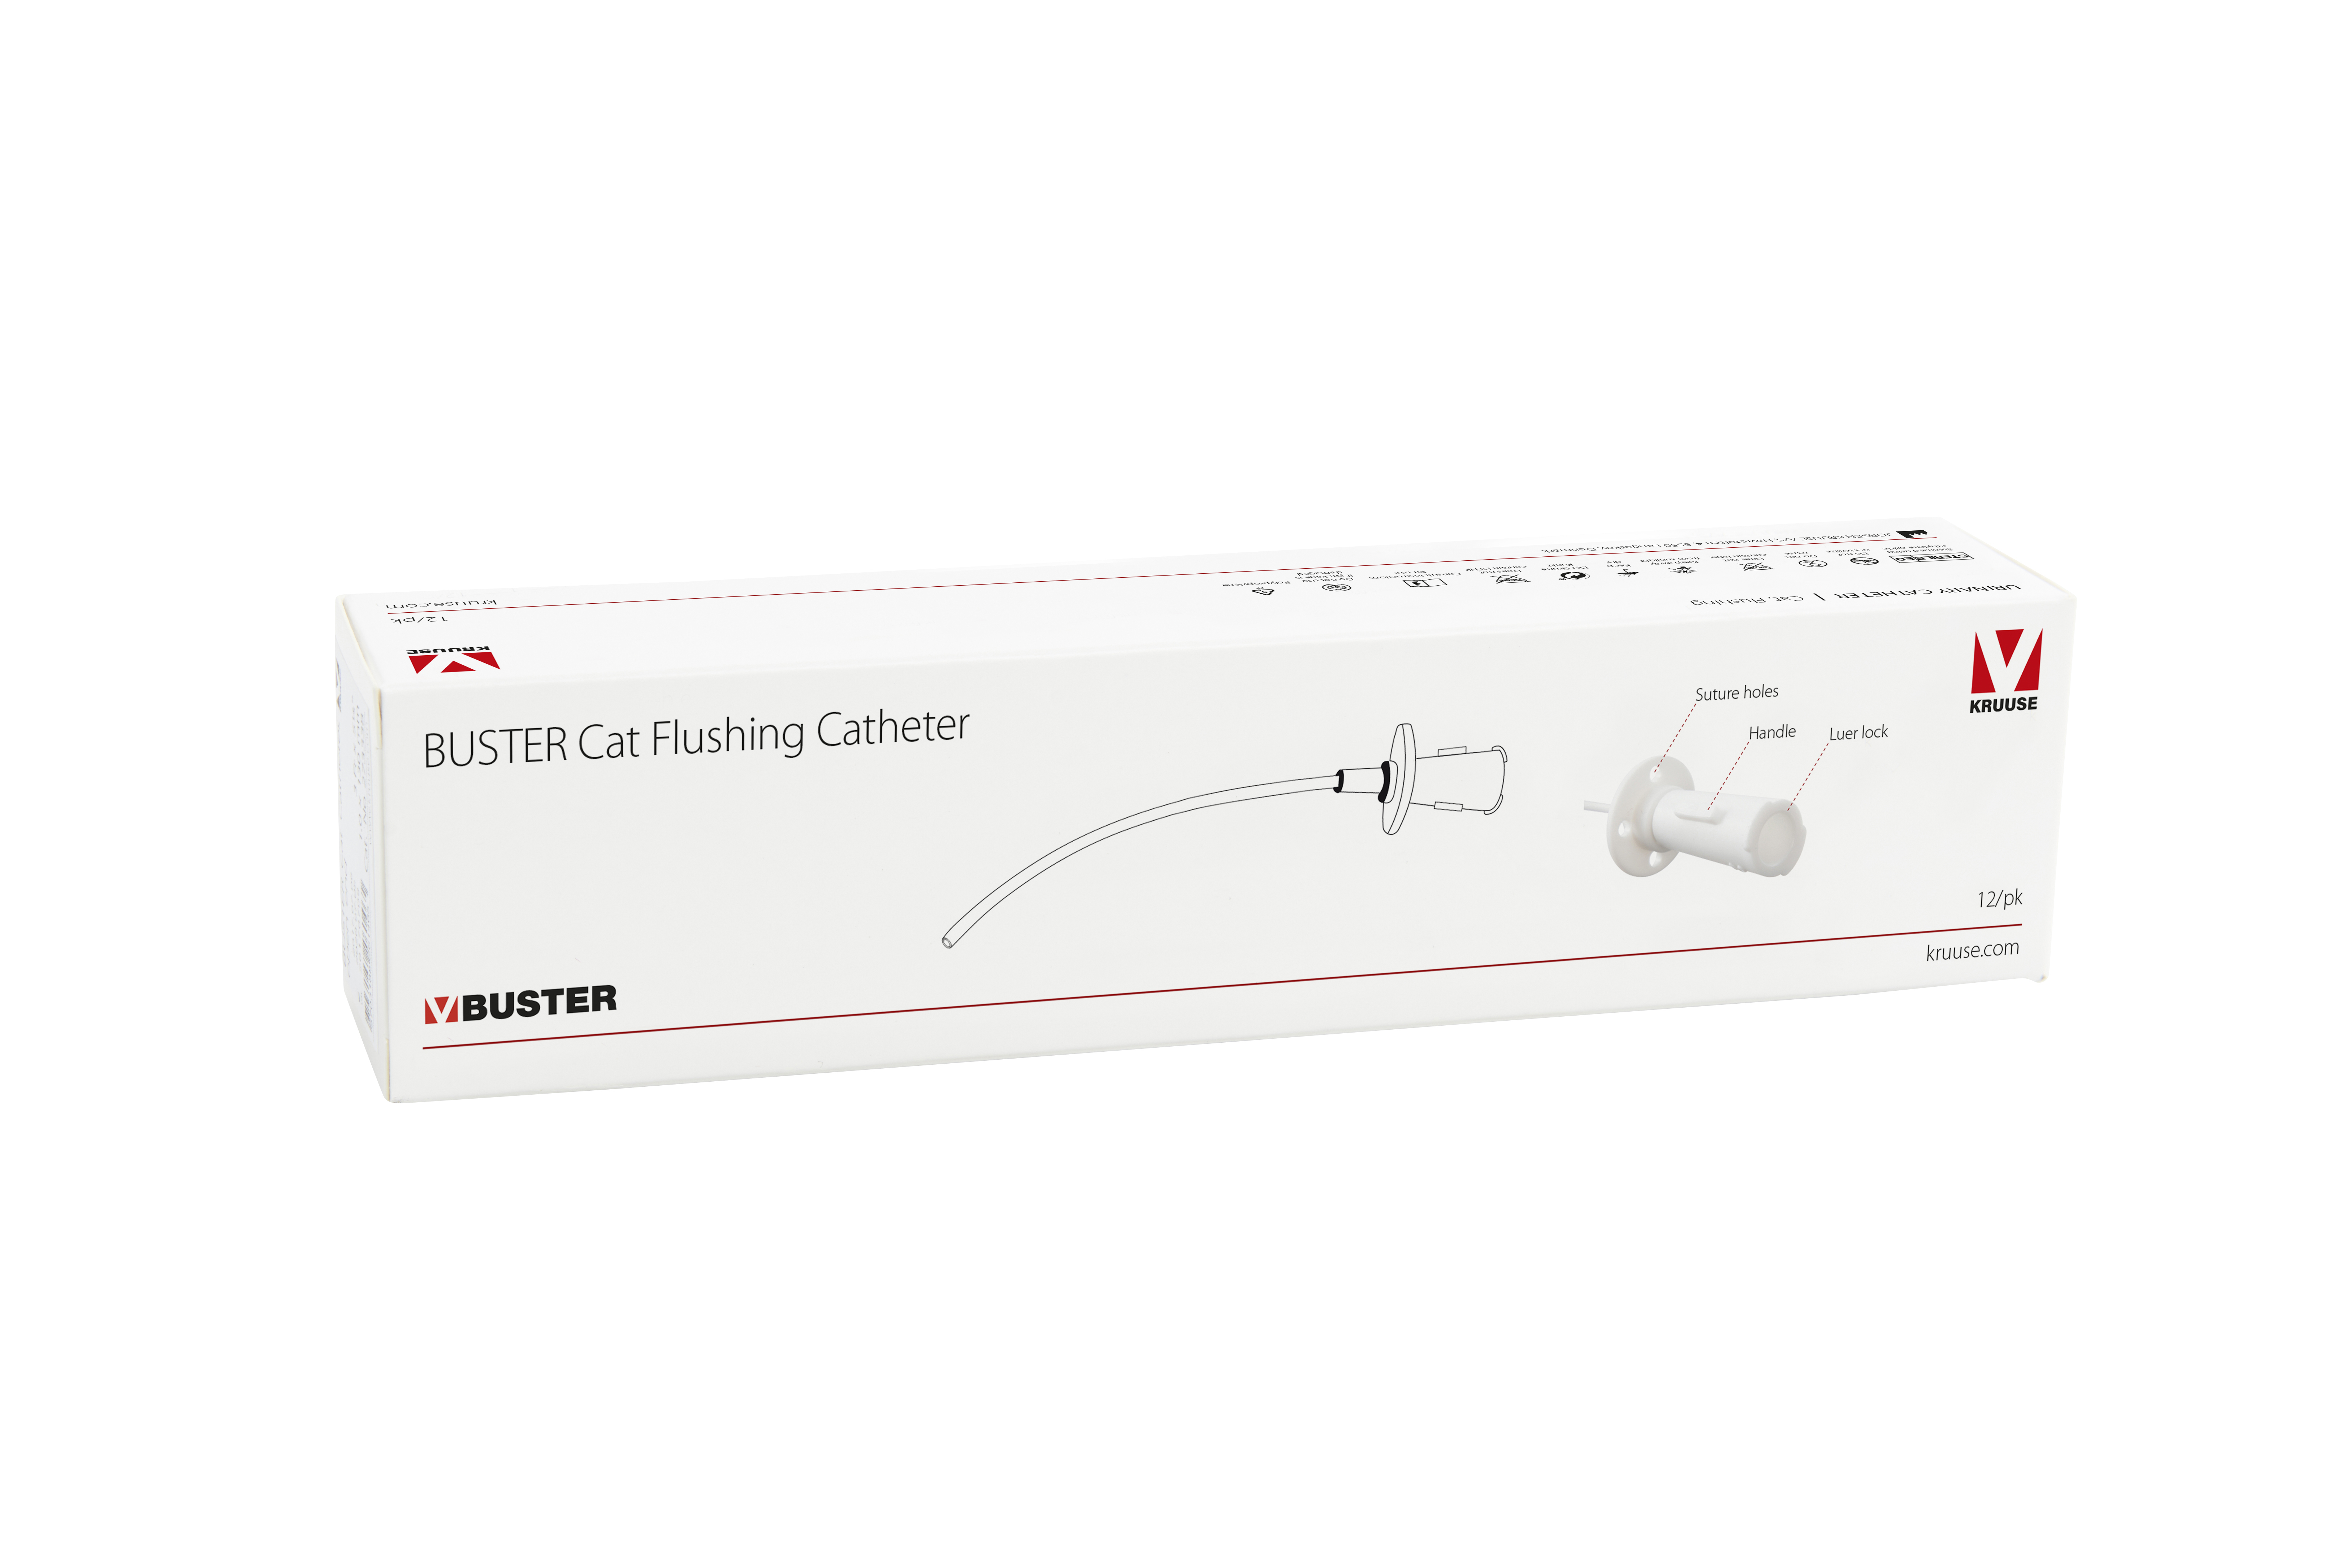 BUSTER Cat Flushing Catheter, 4 Fr x 5 1/8”, 1.3 x 130 mm, open end, without stylet, sterile, 12/pk